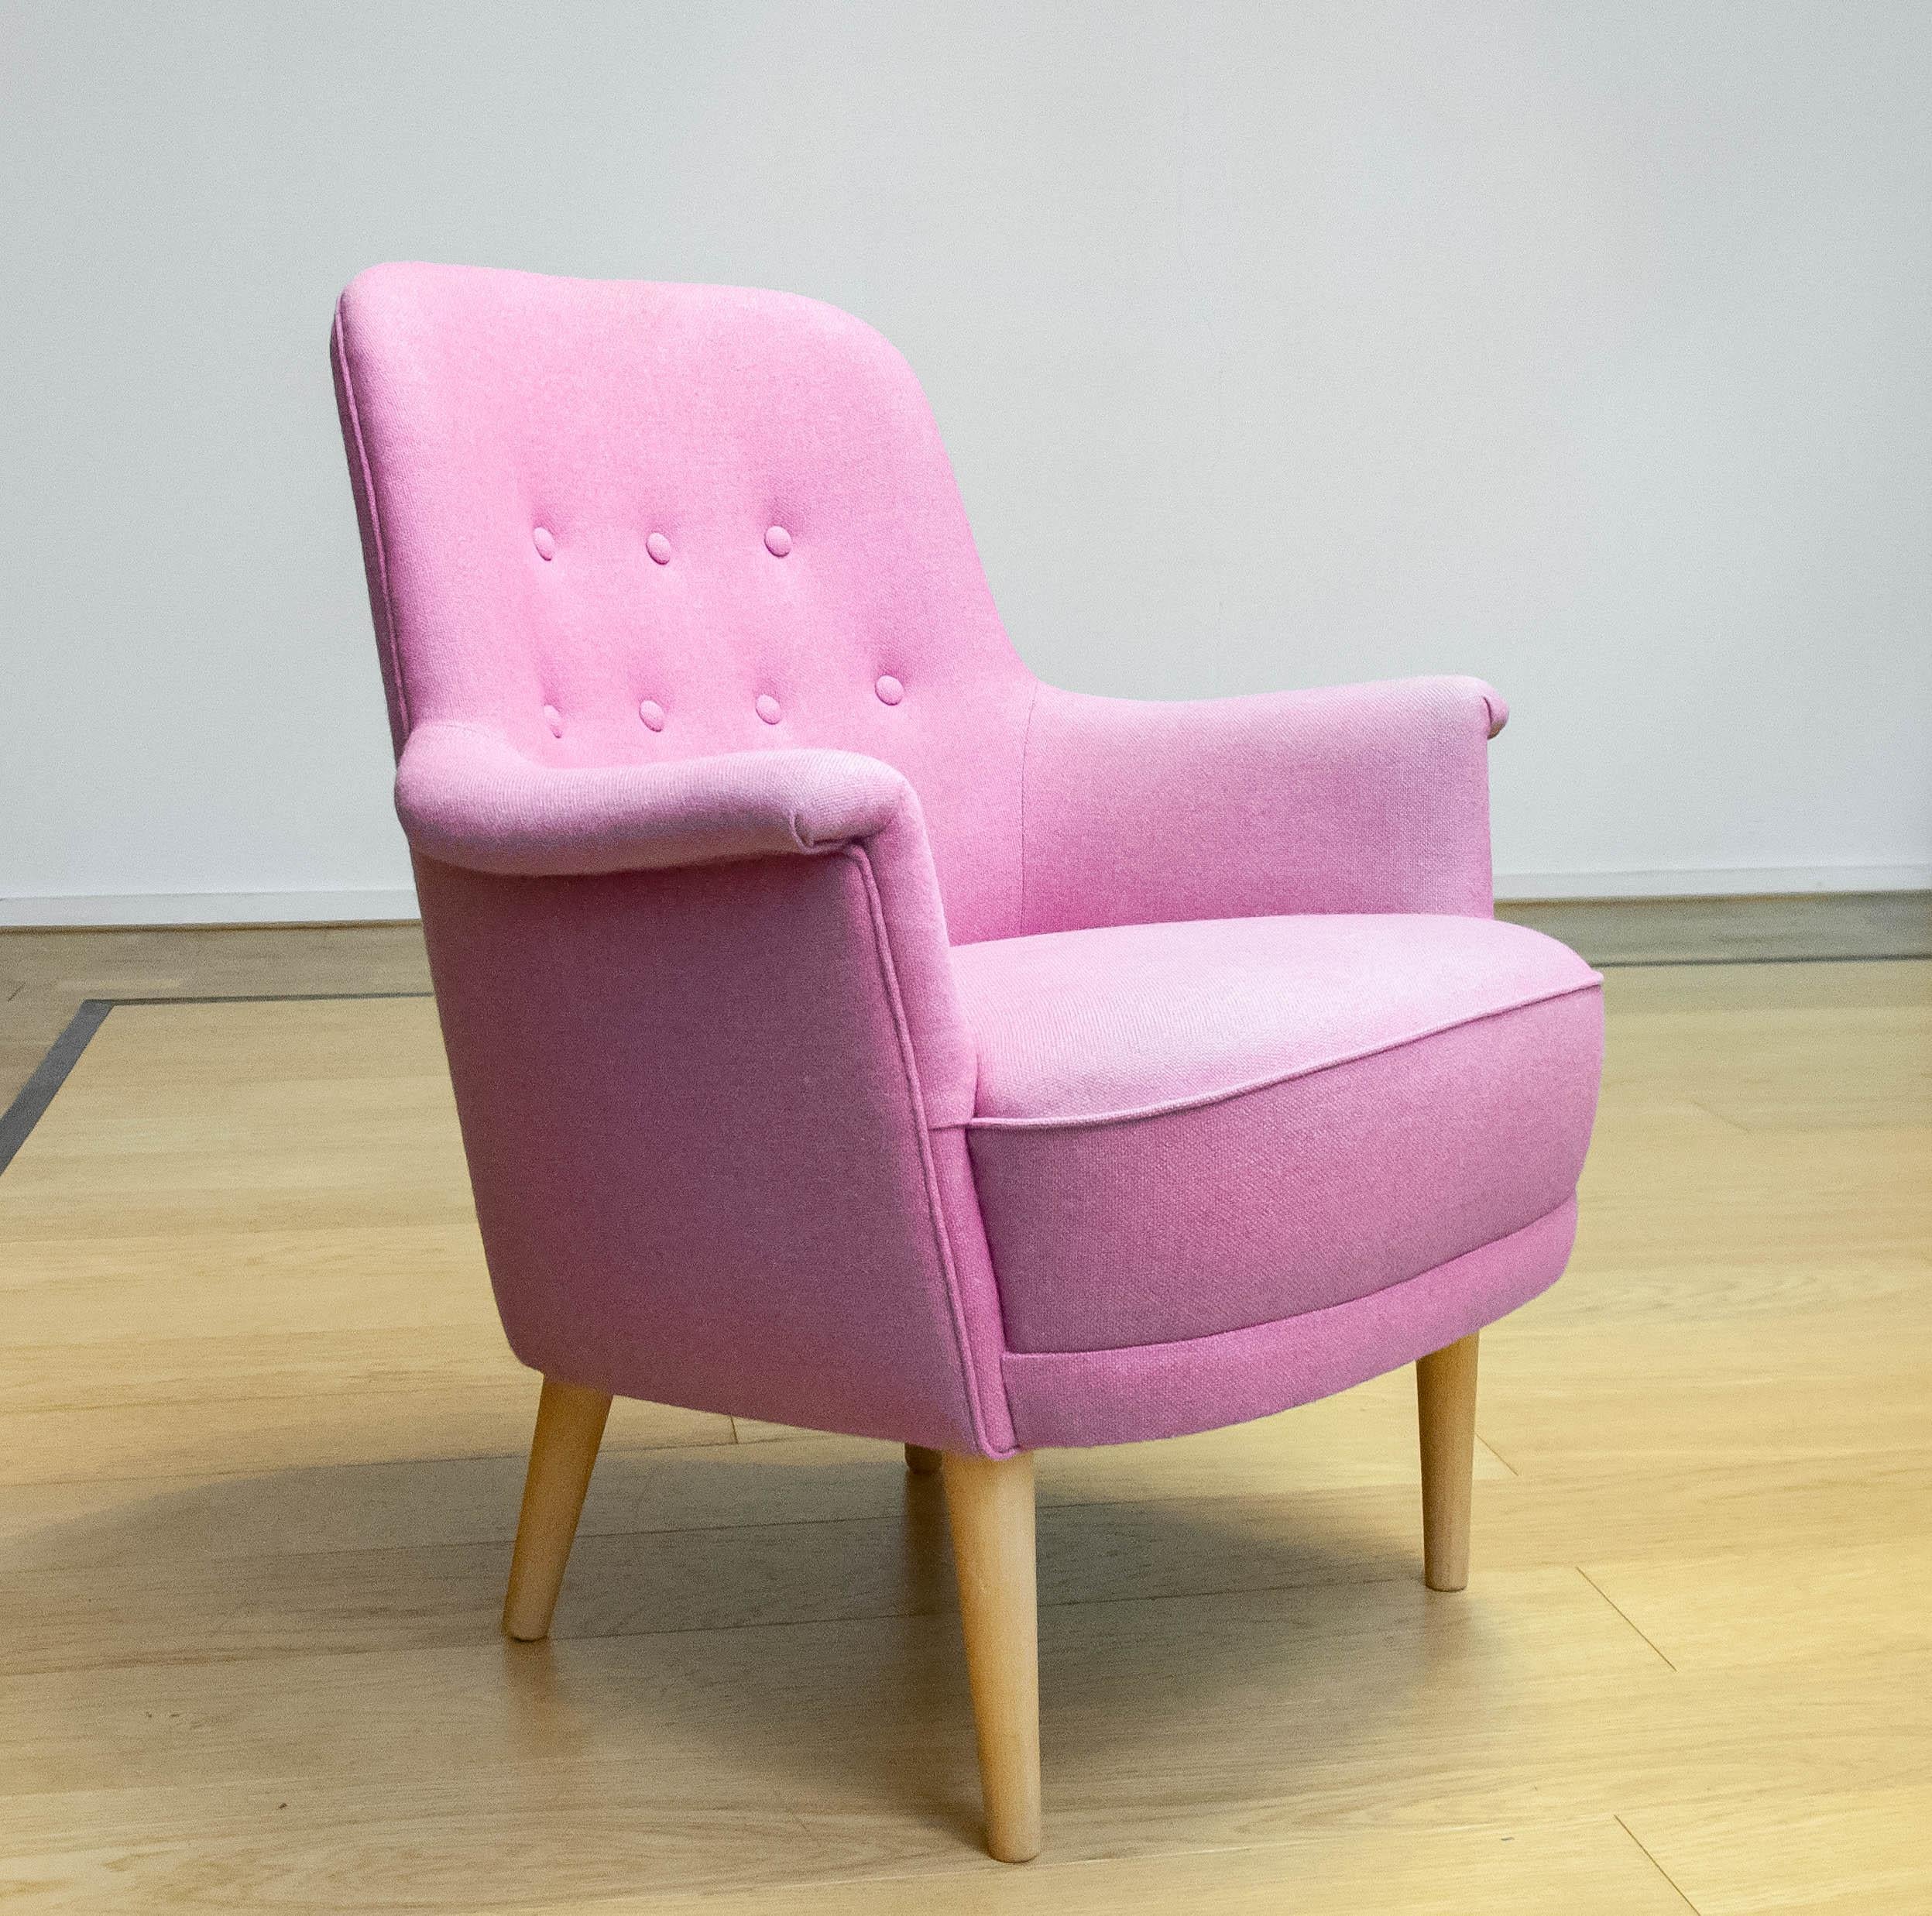 Mid-Century Modern 1950s Upholstered With Lilac Wool Armchair By Carl Malmsten For O.H. Sjogren. For Sale